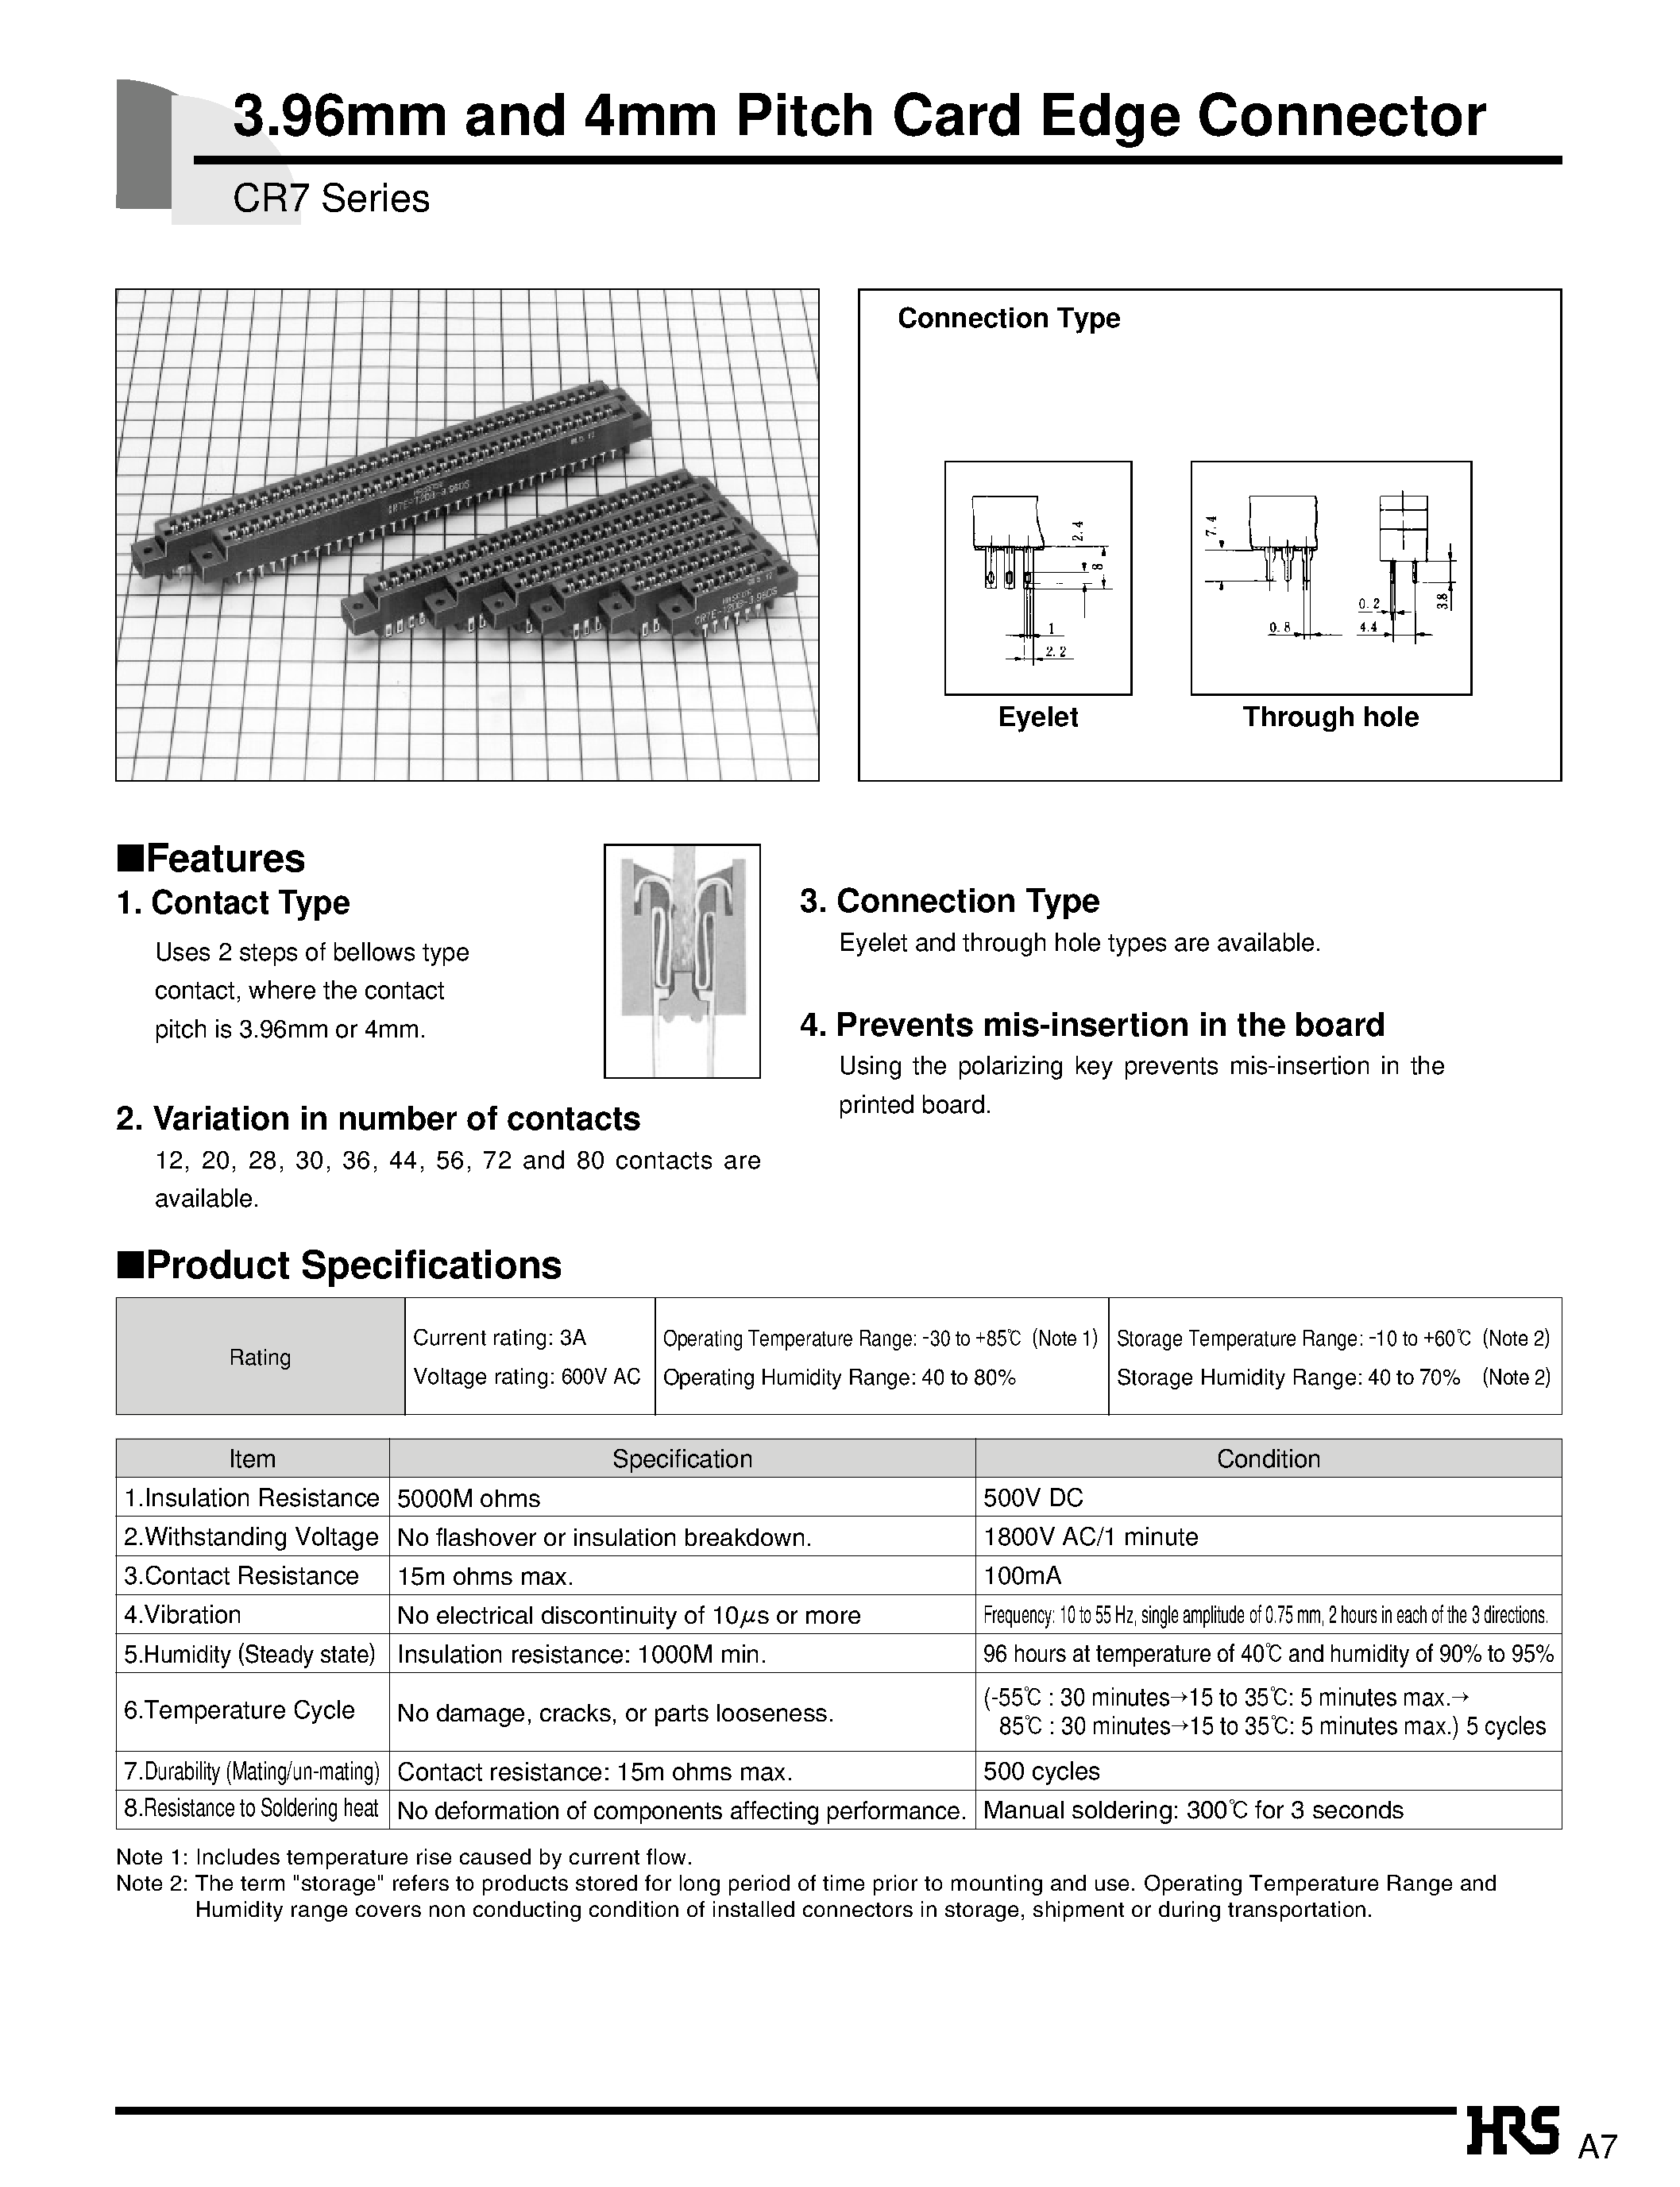 Datasheet CR7E-72DB-3.96E - 3.96mm and 4mm Pitch Card Edge Connector page 1